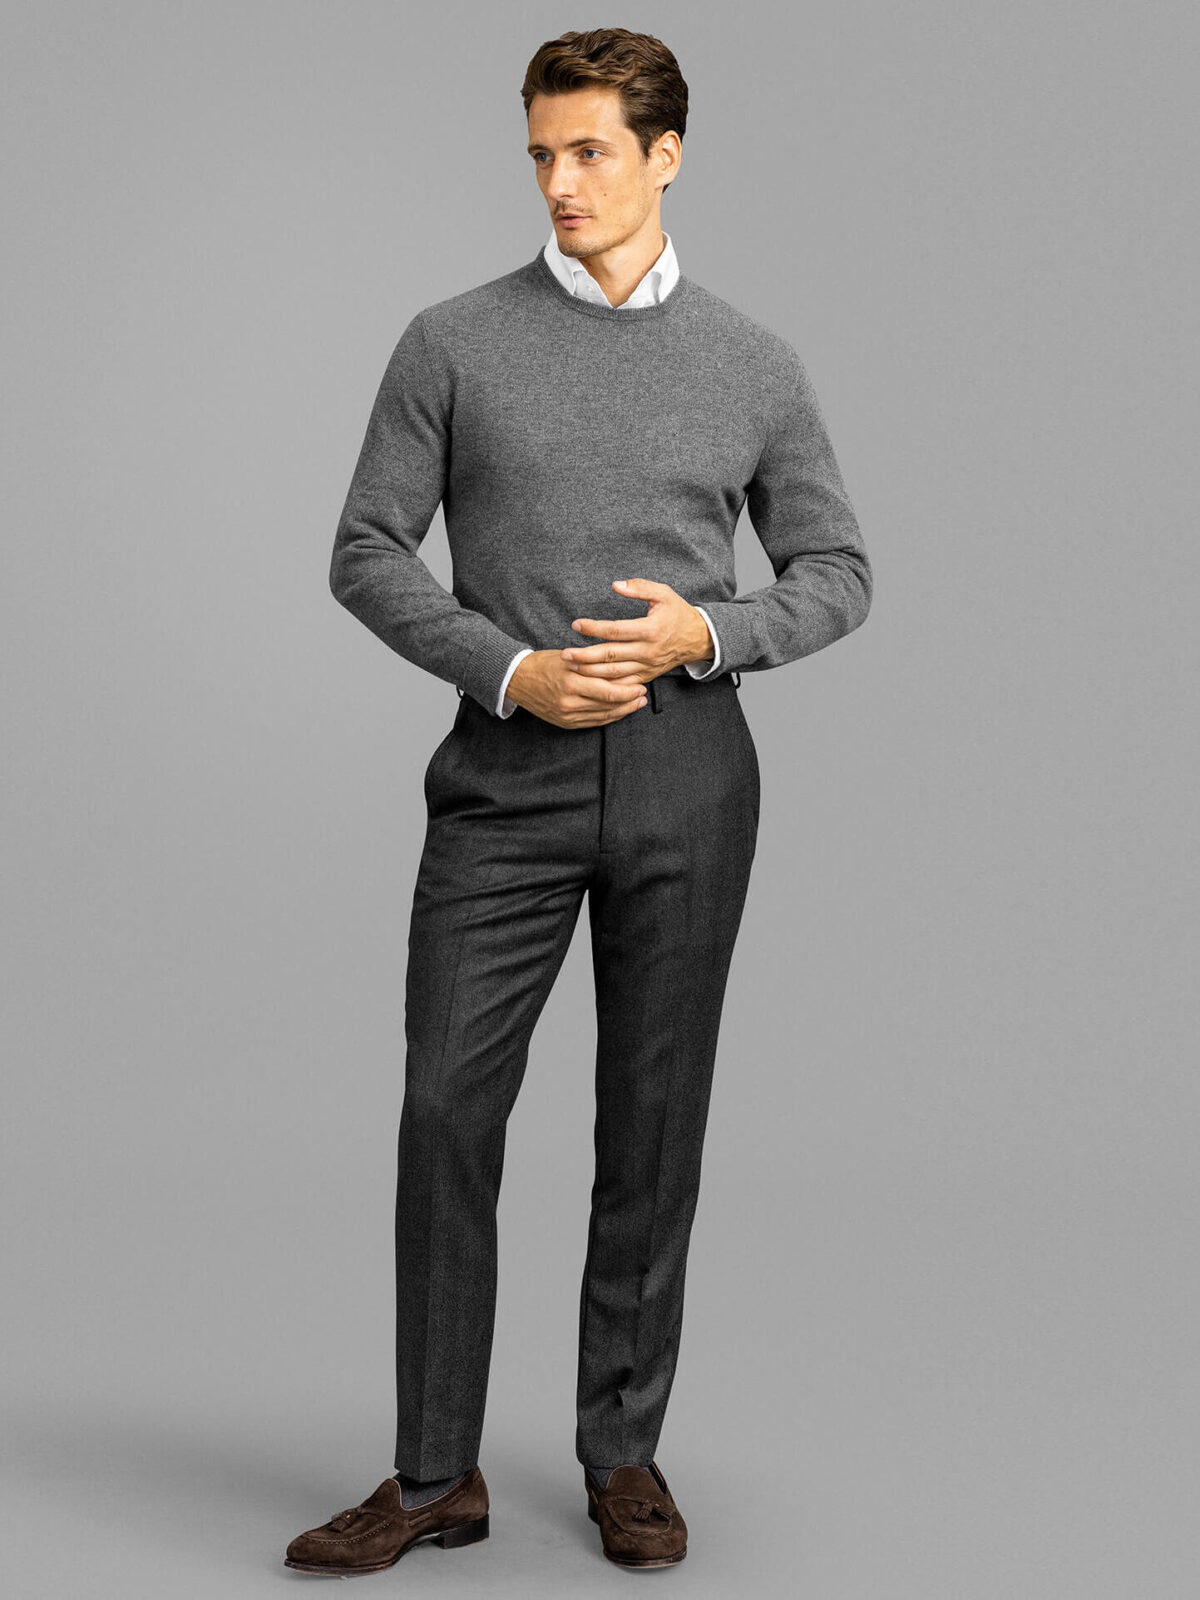 Dress Pant Sweatpants Are Like Pajama Jeans For The Business Casual Crowd